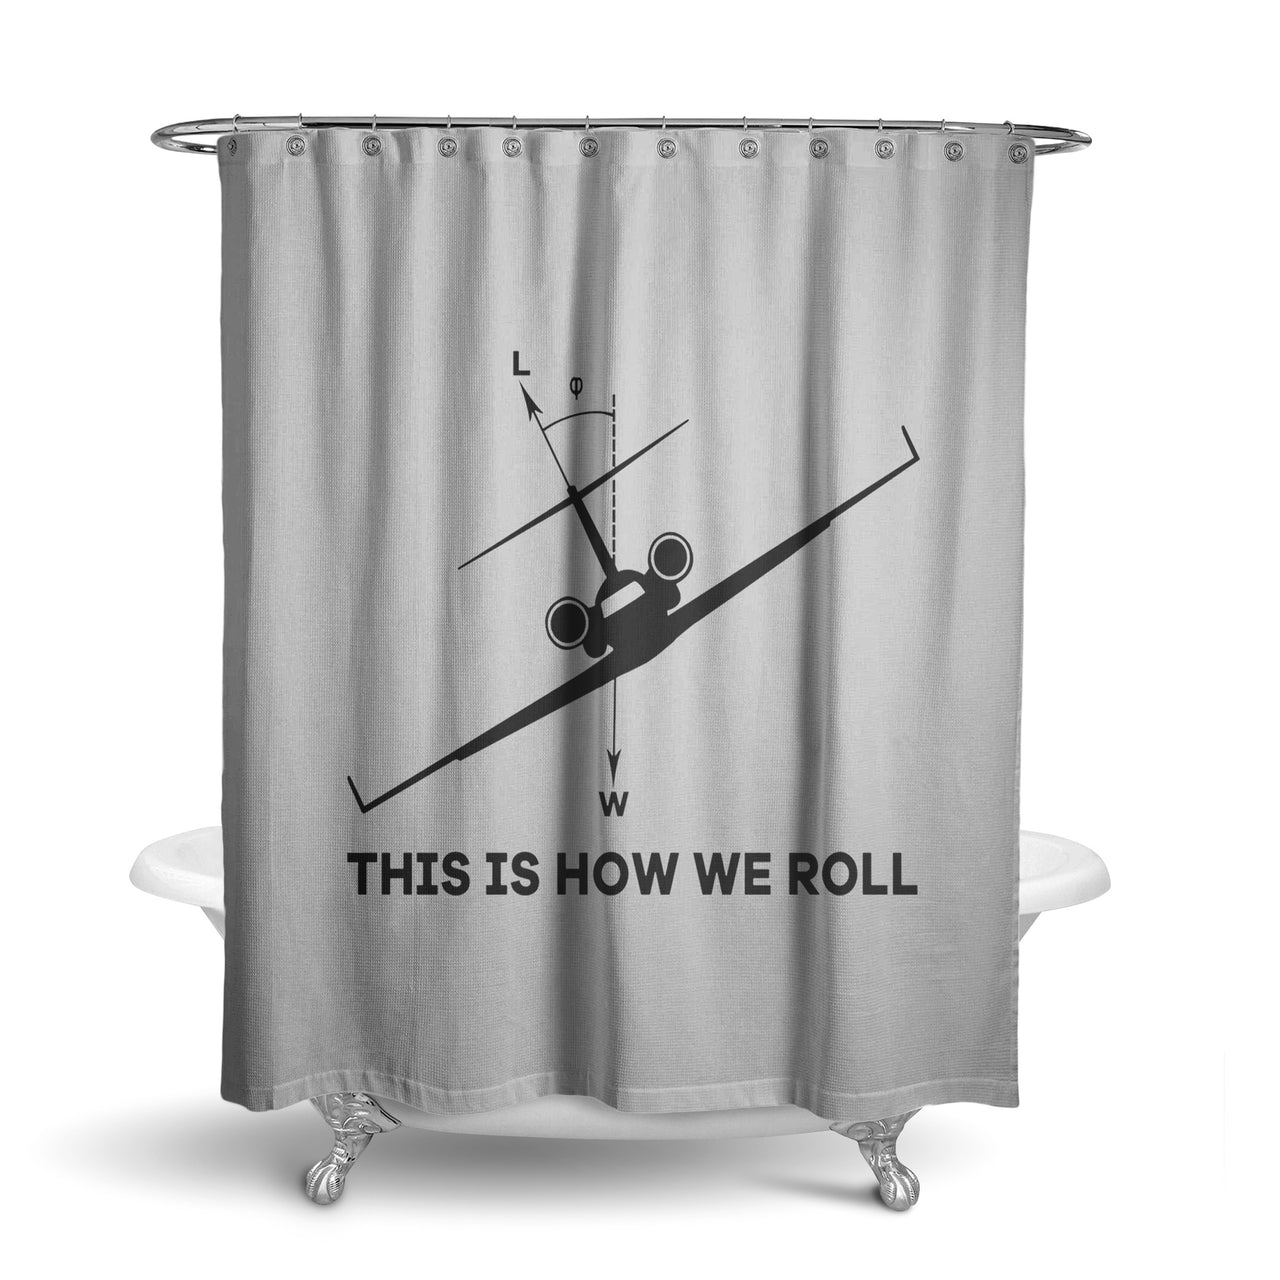 This is How We Roll Designed Shower Curtains